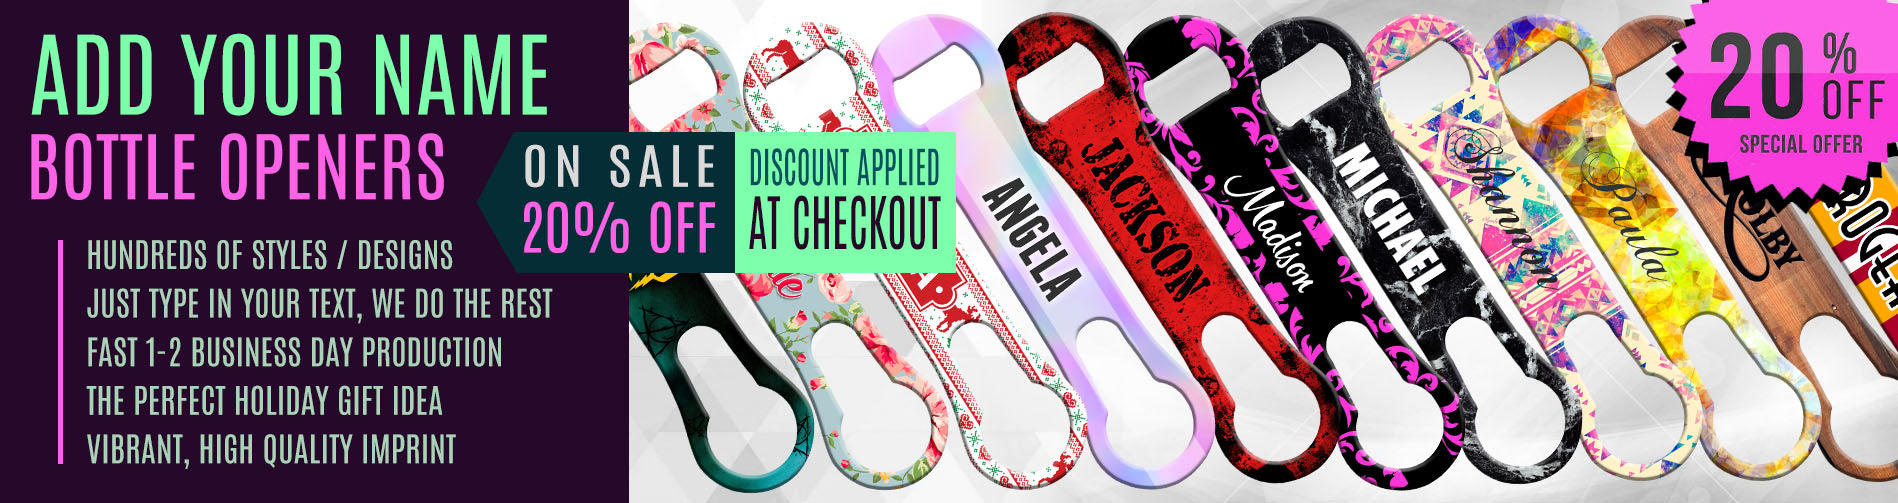 Add your name bottle openers - 20% off